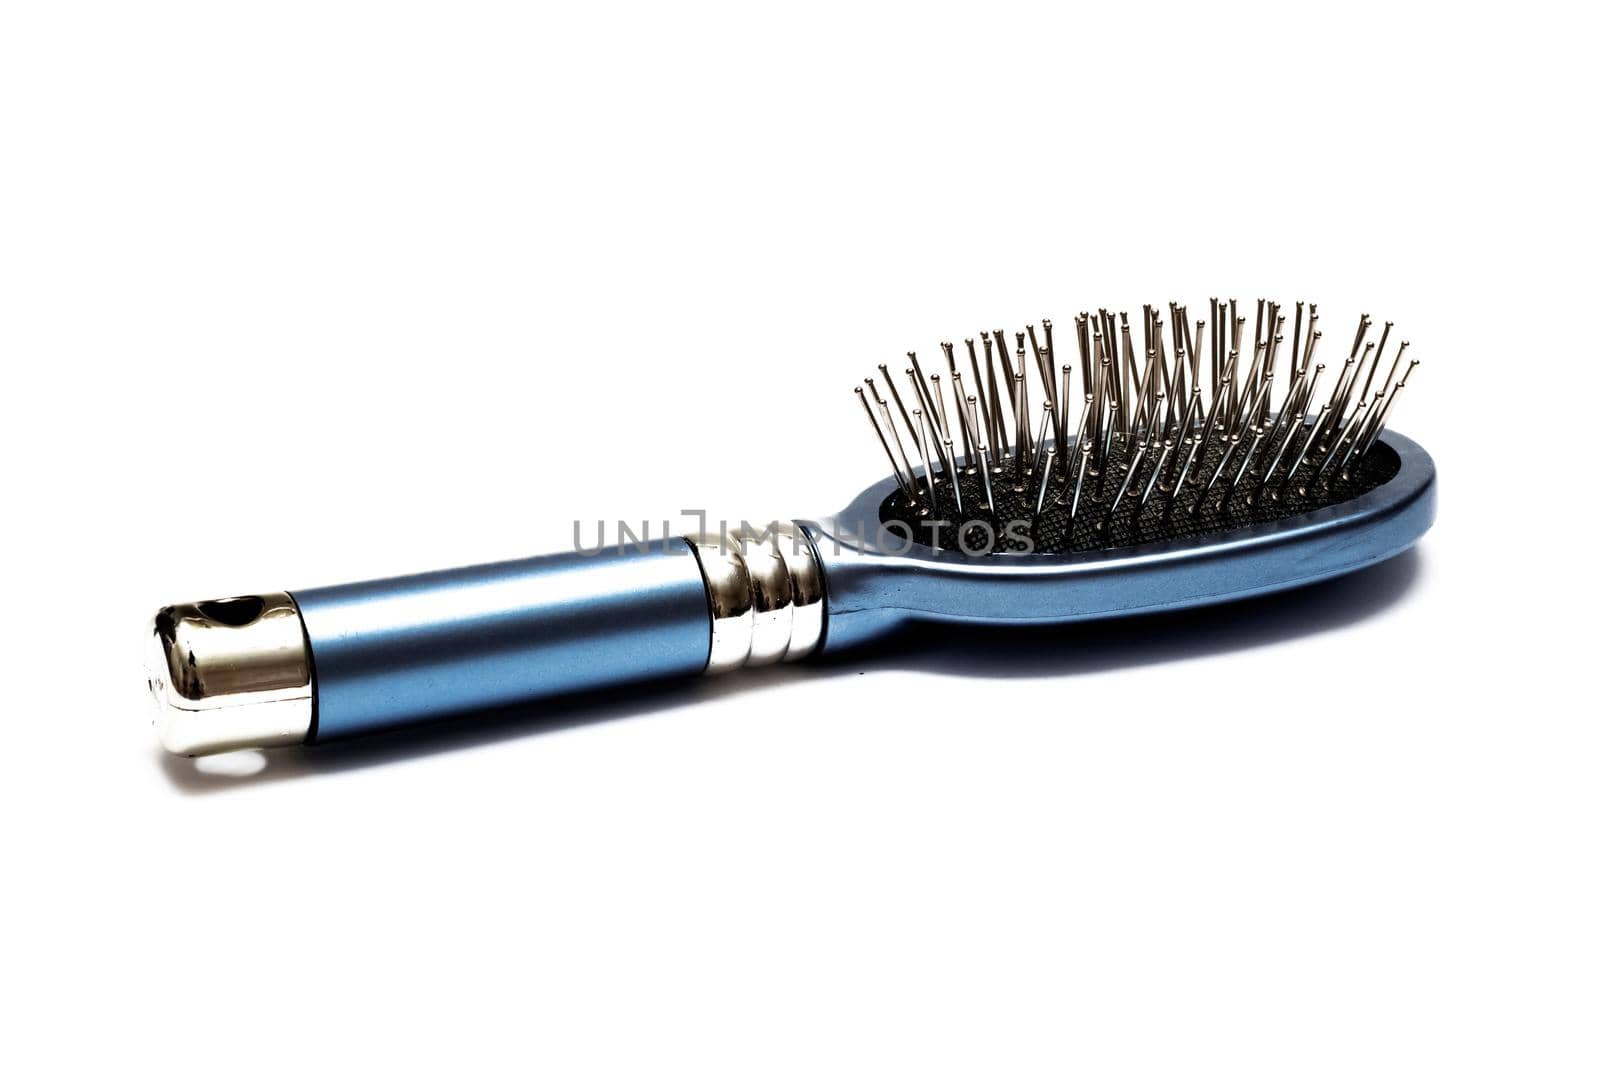 Blue metal hairbrush isolated on white background by Vera1703